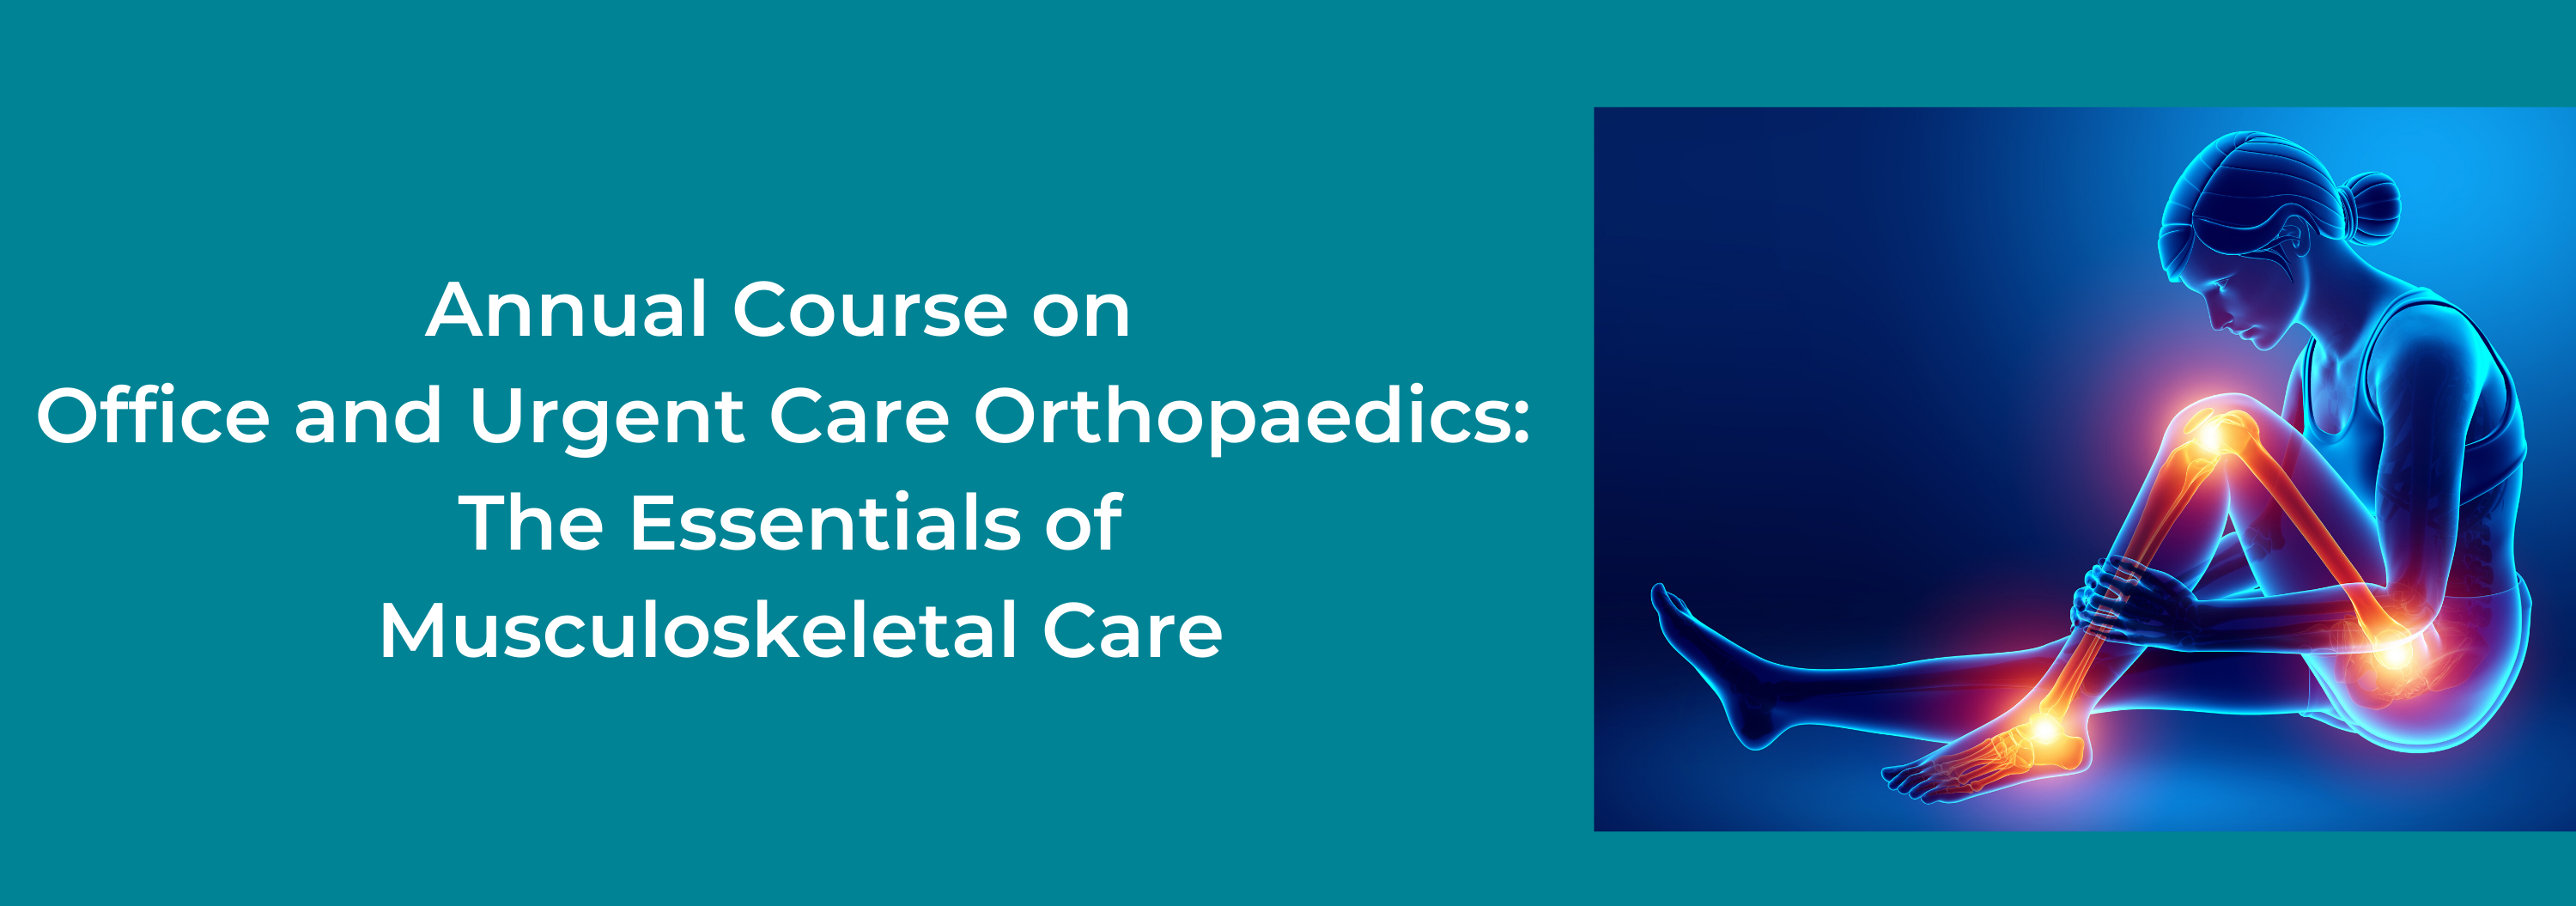 CANCELLED- 12th Annual Course on Office and Urgent Care Orthopaedics: The Essentials of Musculoskeletal Care Banner